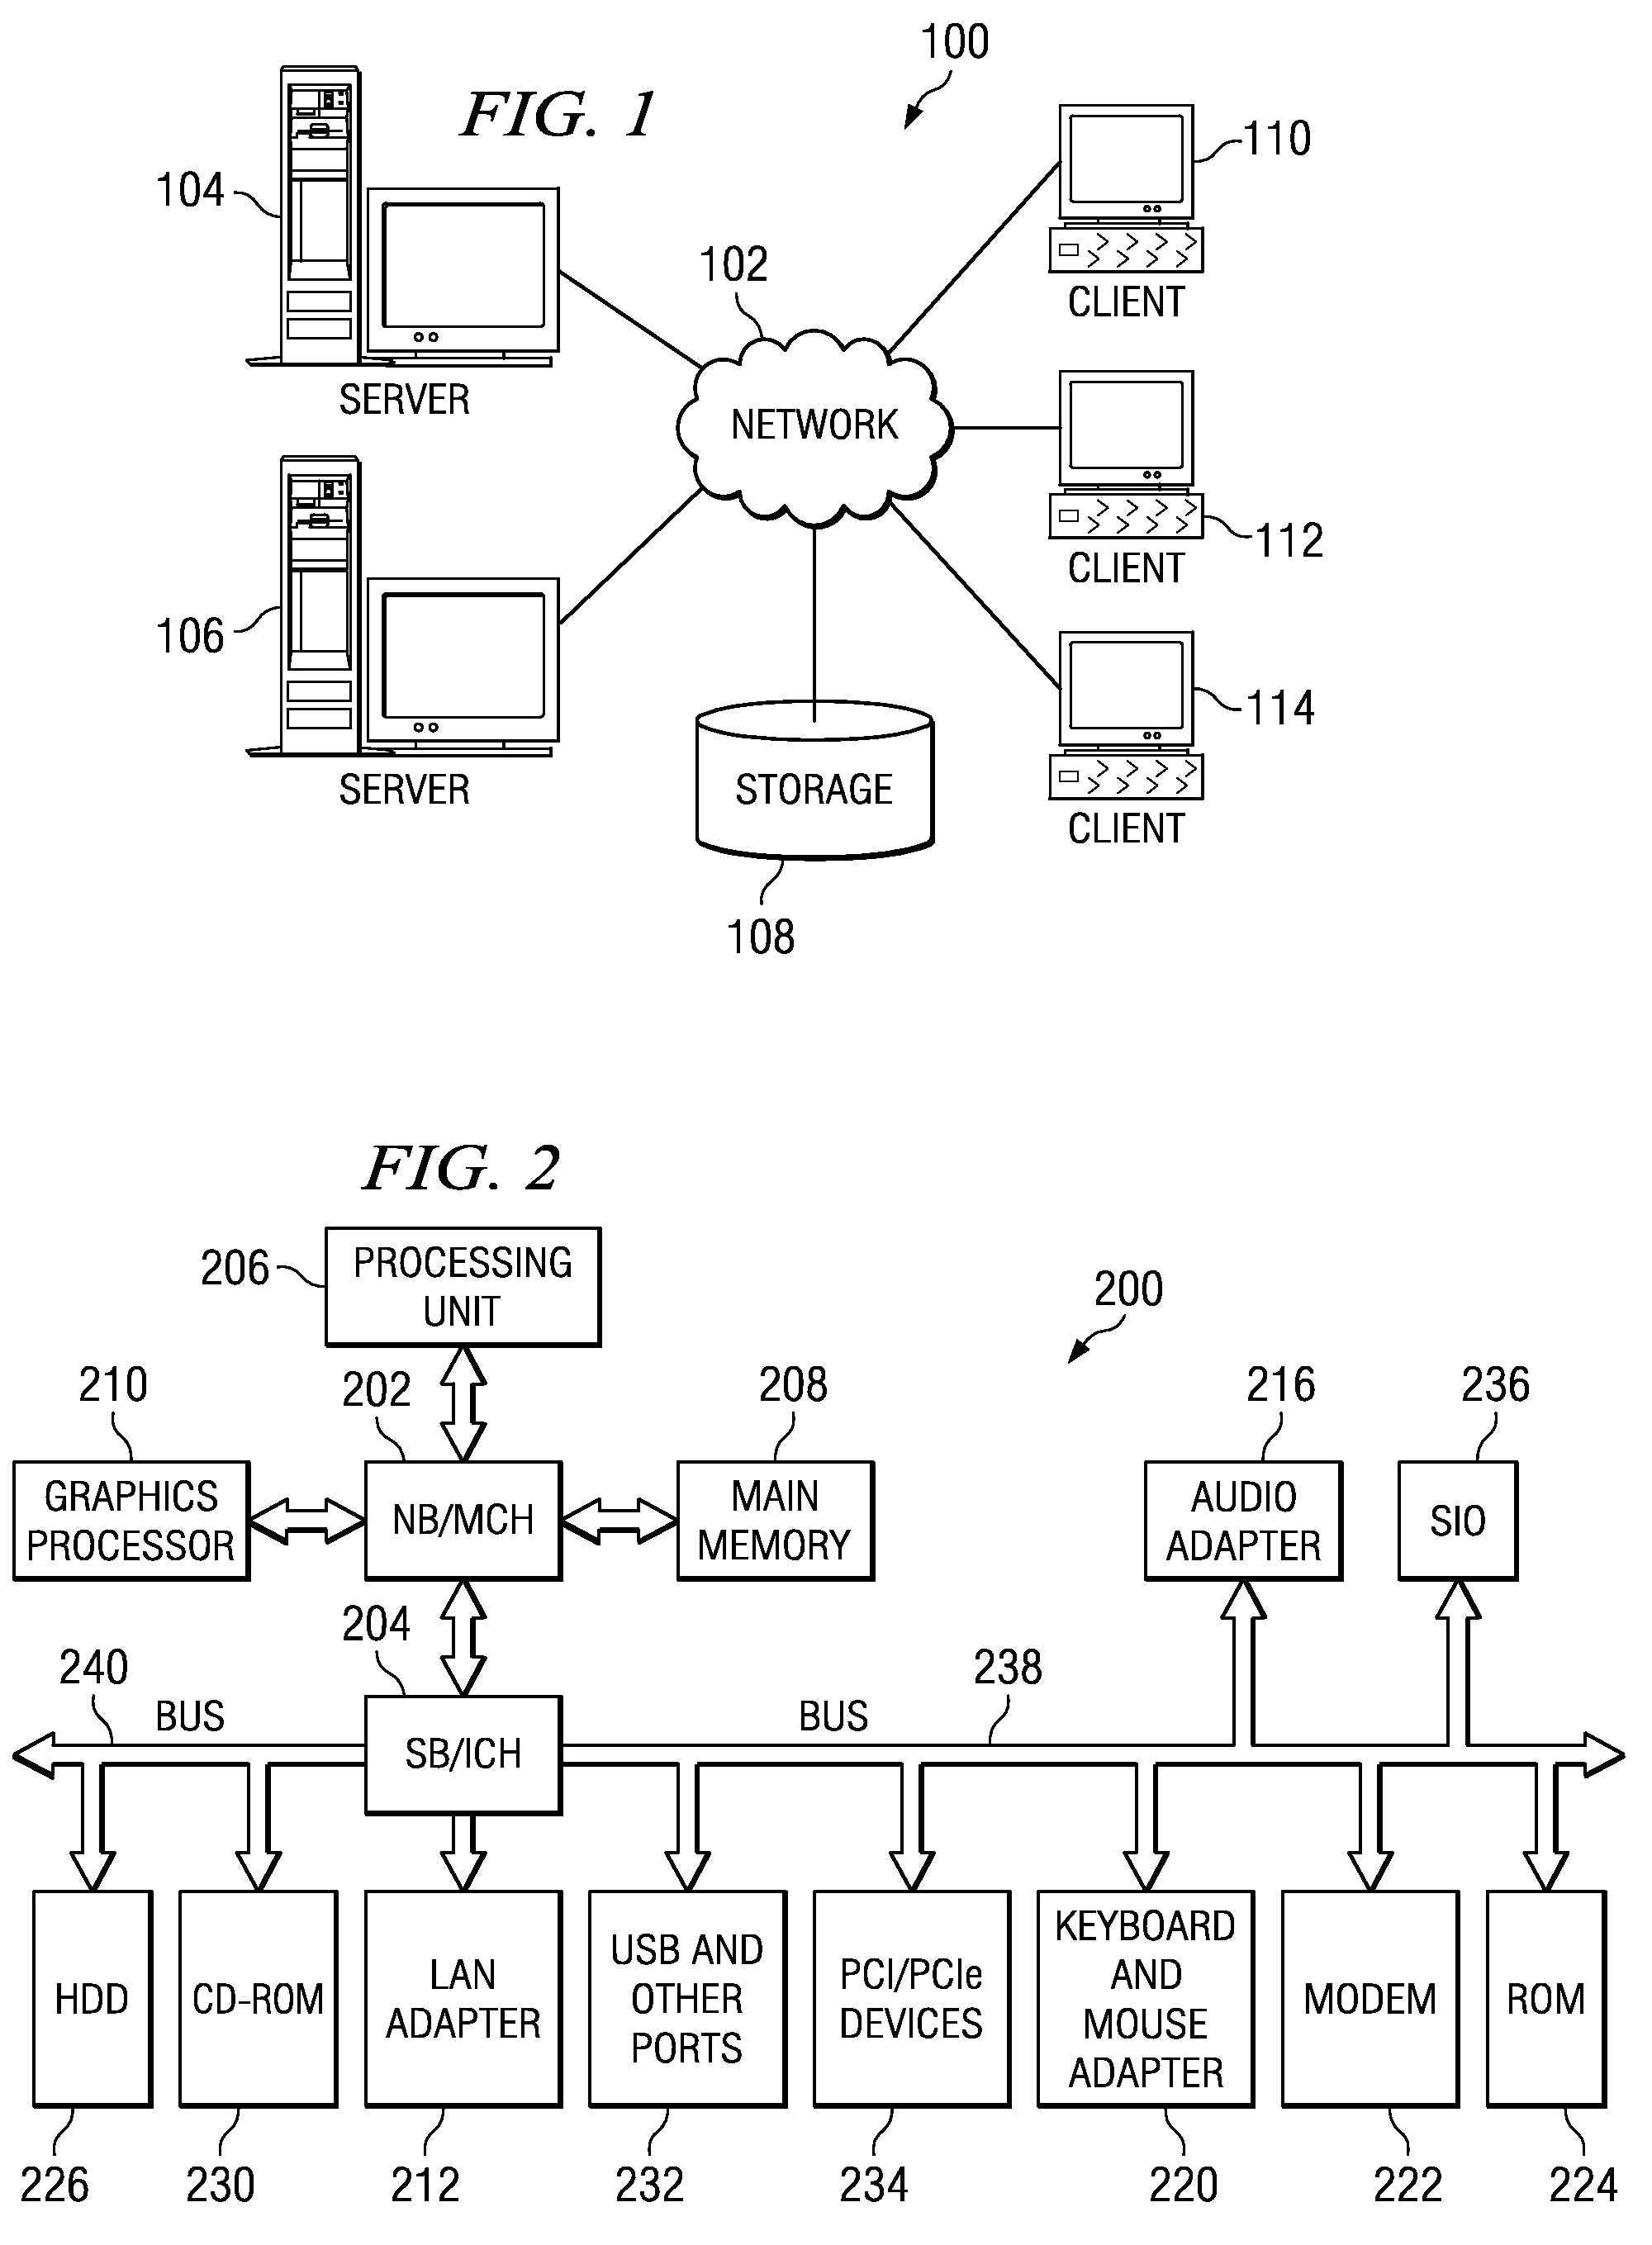 Determination of access checks in a mixed role based access control and discretionary access control environment